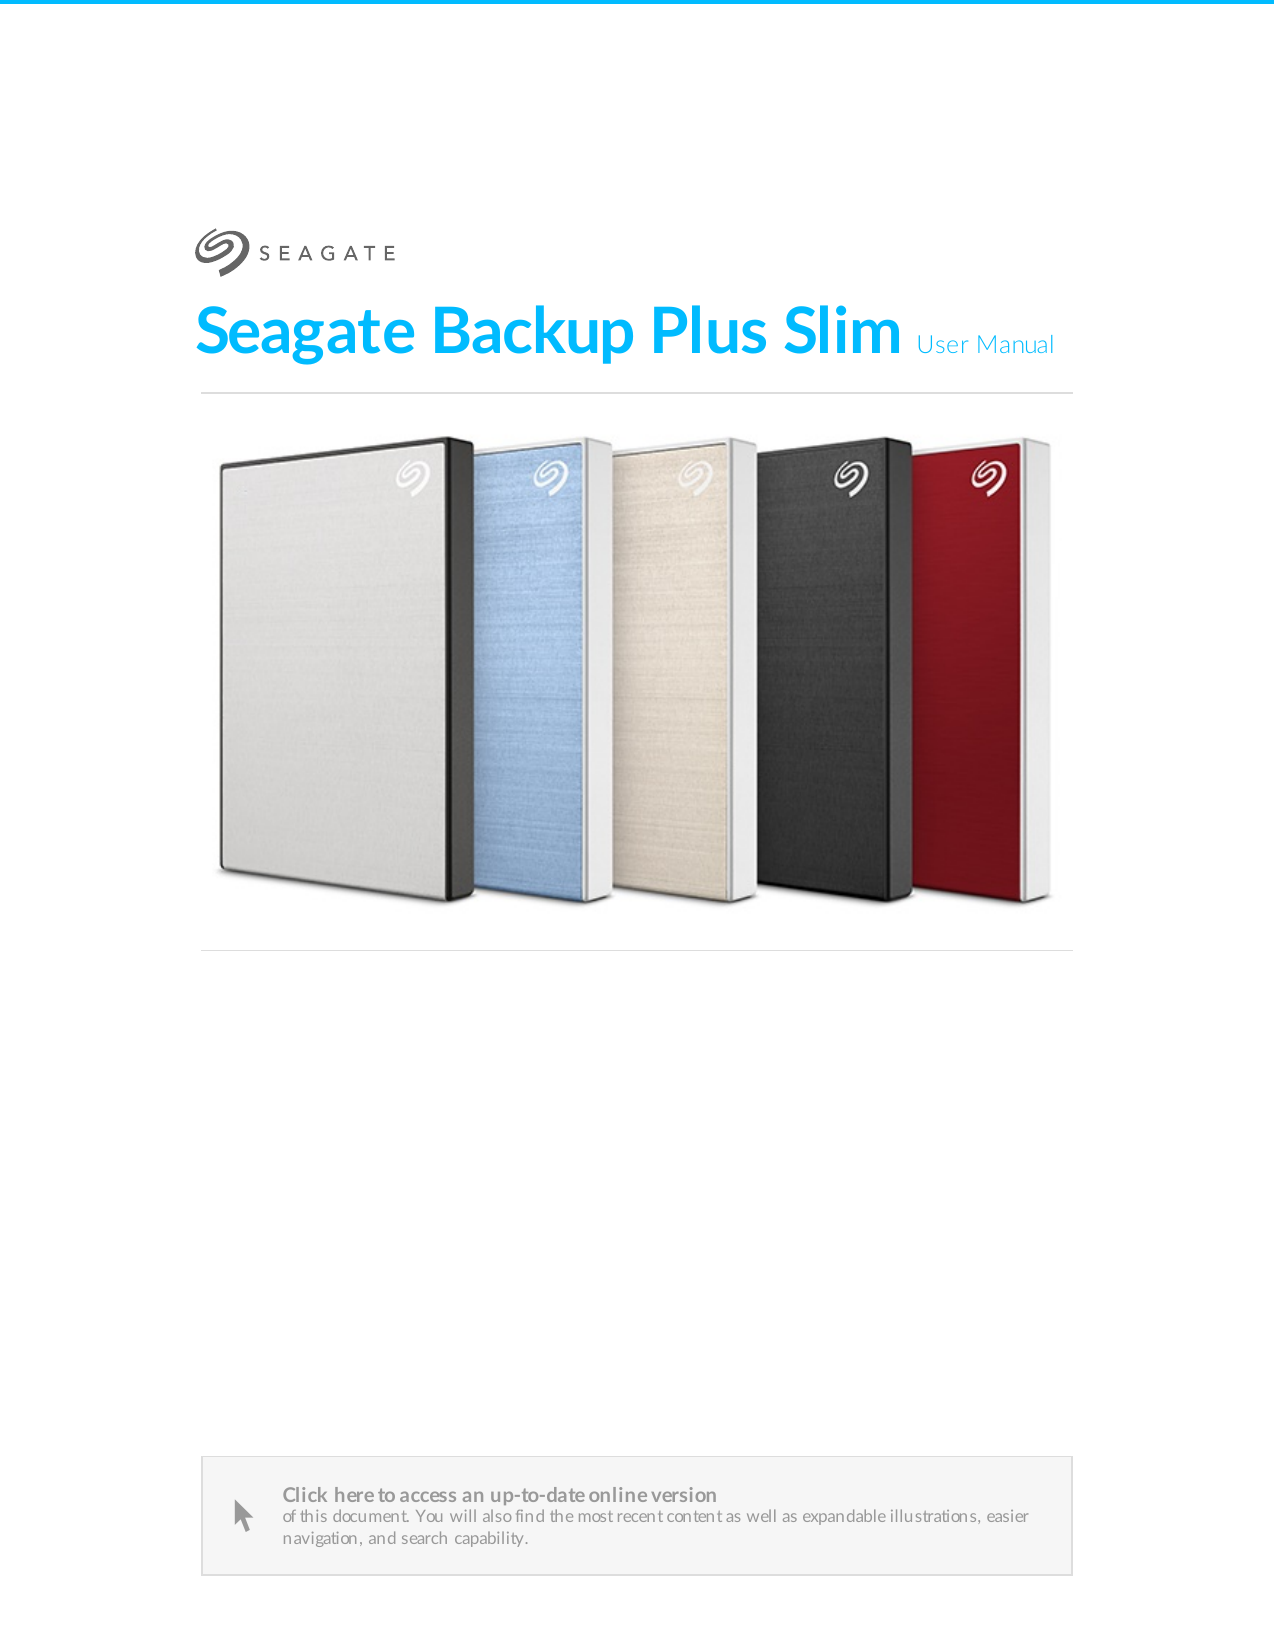 how to backup my computer using seagate backup plus slim